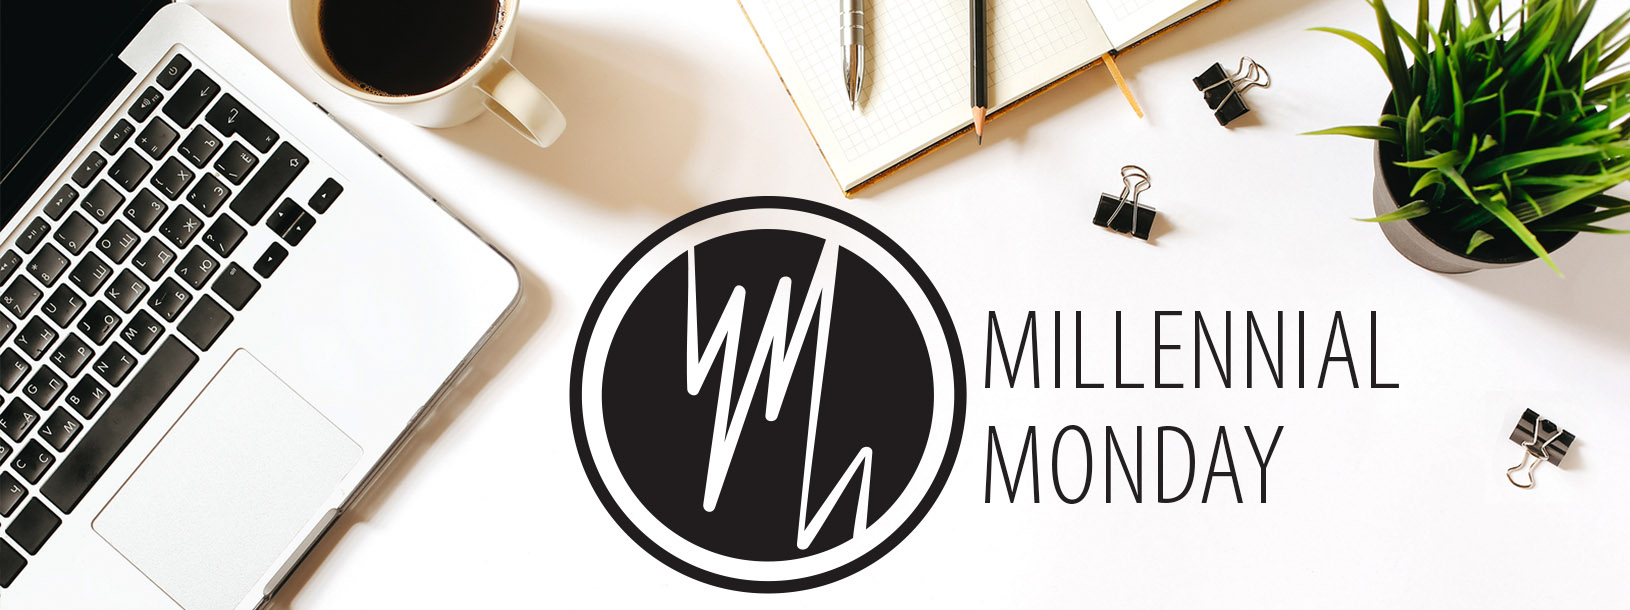 Millennial Monday: God answered my prayers, now what?